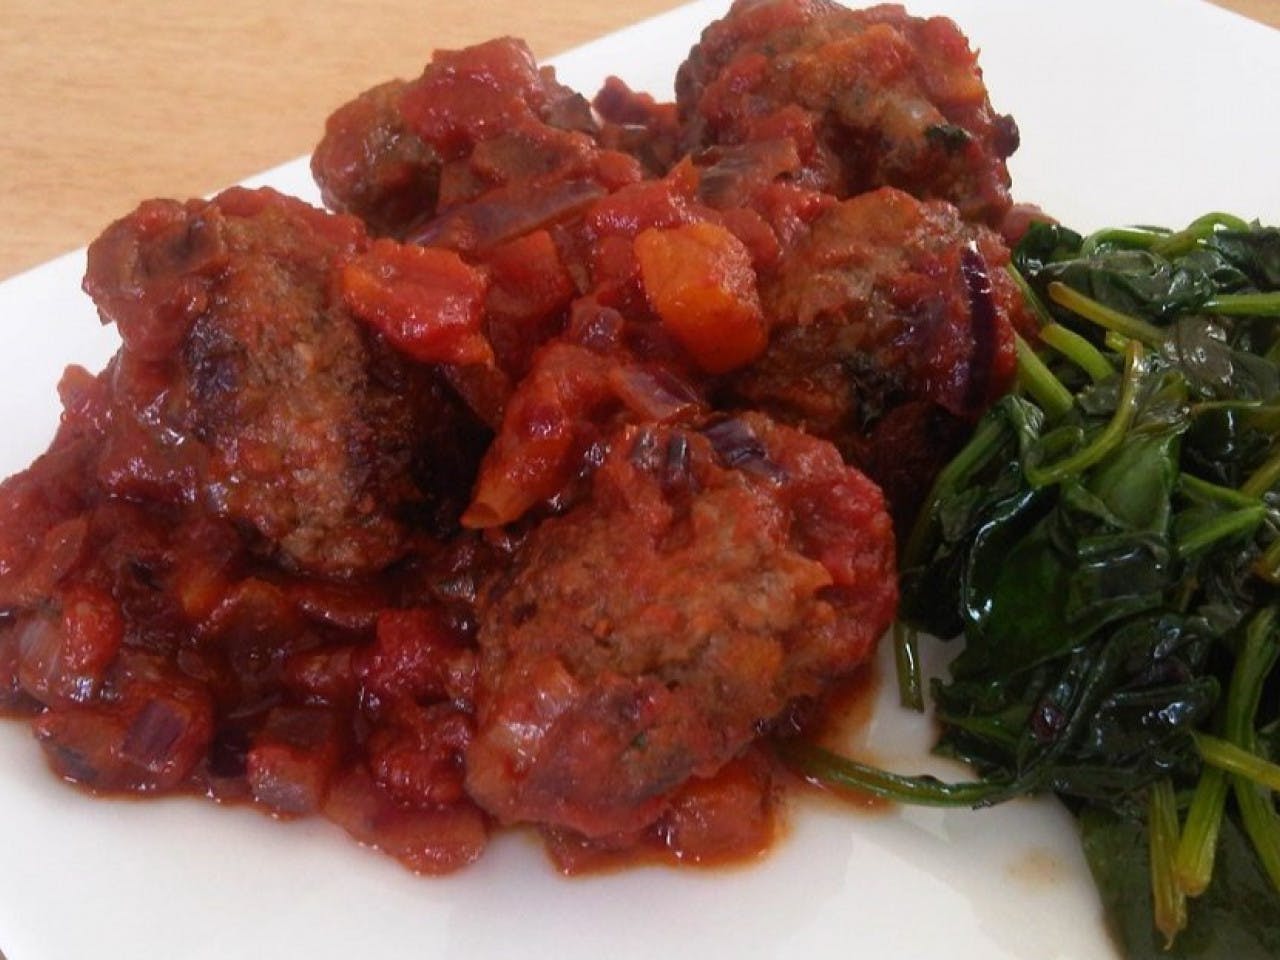 Meatballs with apricot in tomato sauce